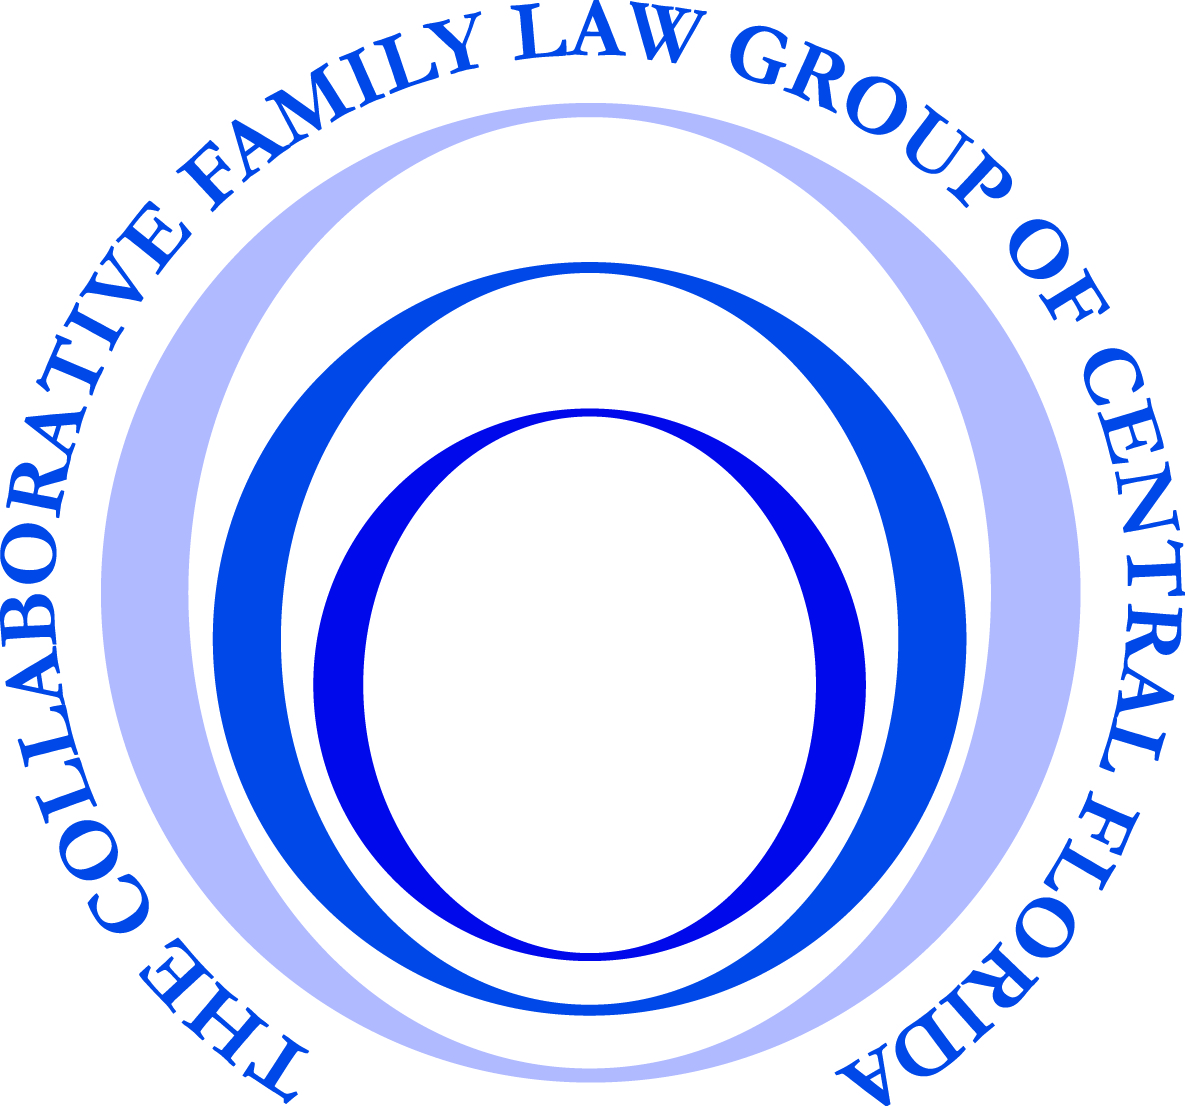 Collaborative Family Law Group of Central Florida